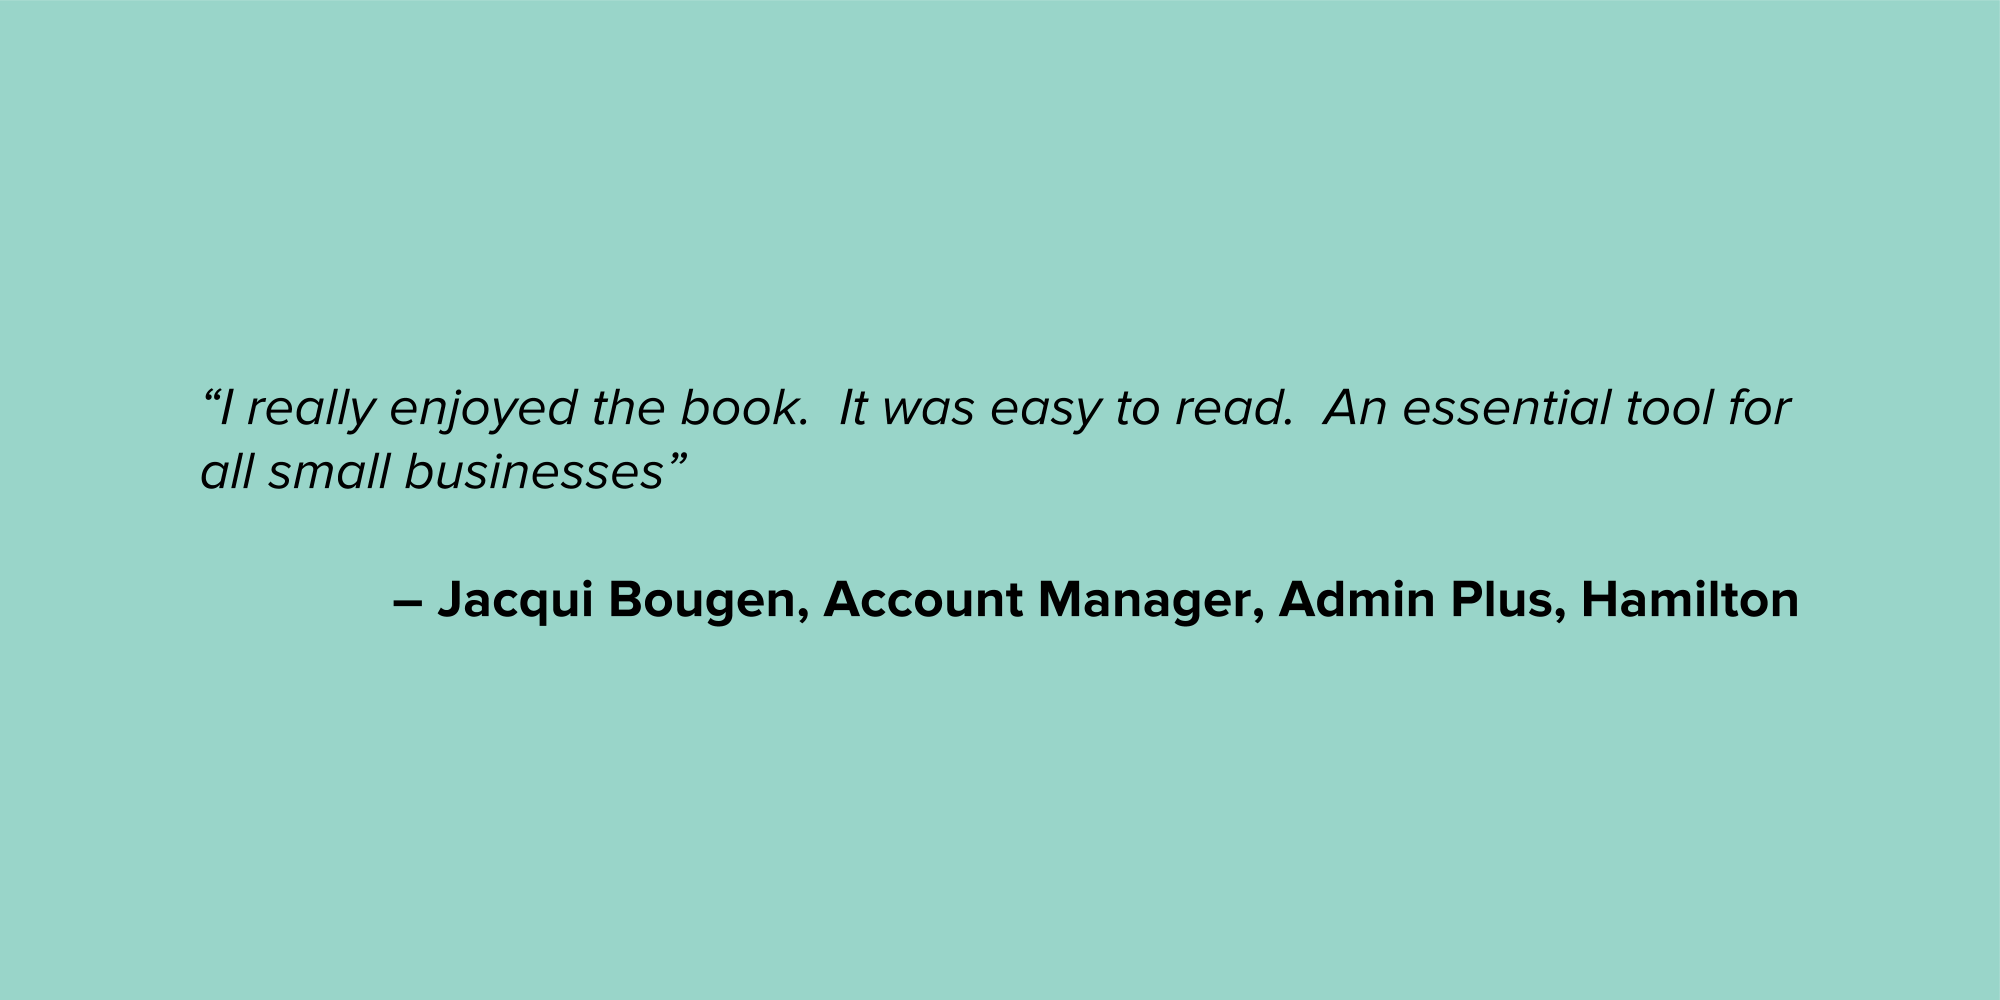 Jacqui Bougen Micro Business Testimonial Quote